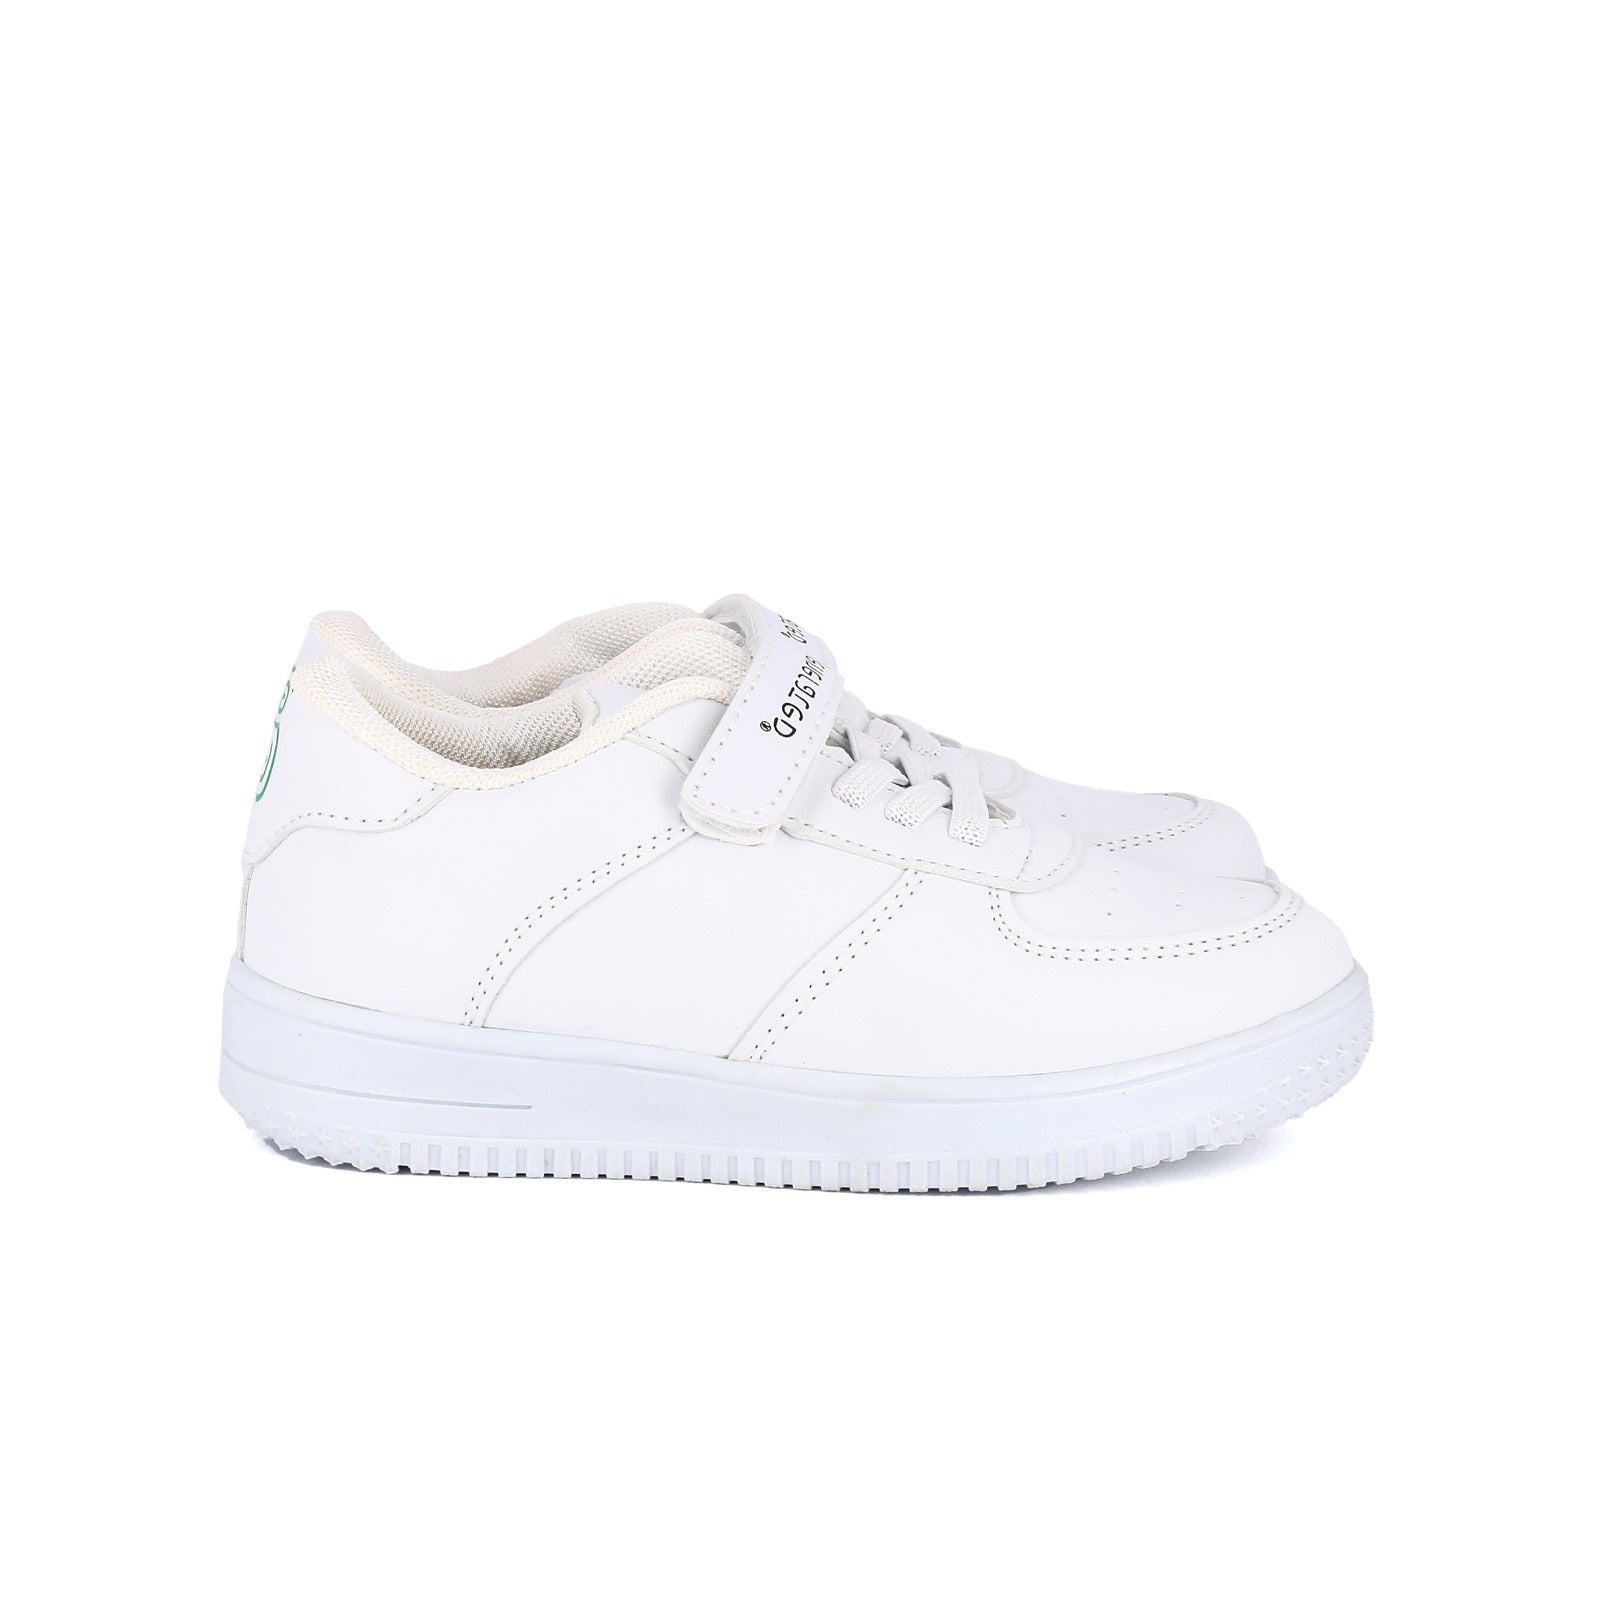 Sneakers unisex bianche